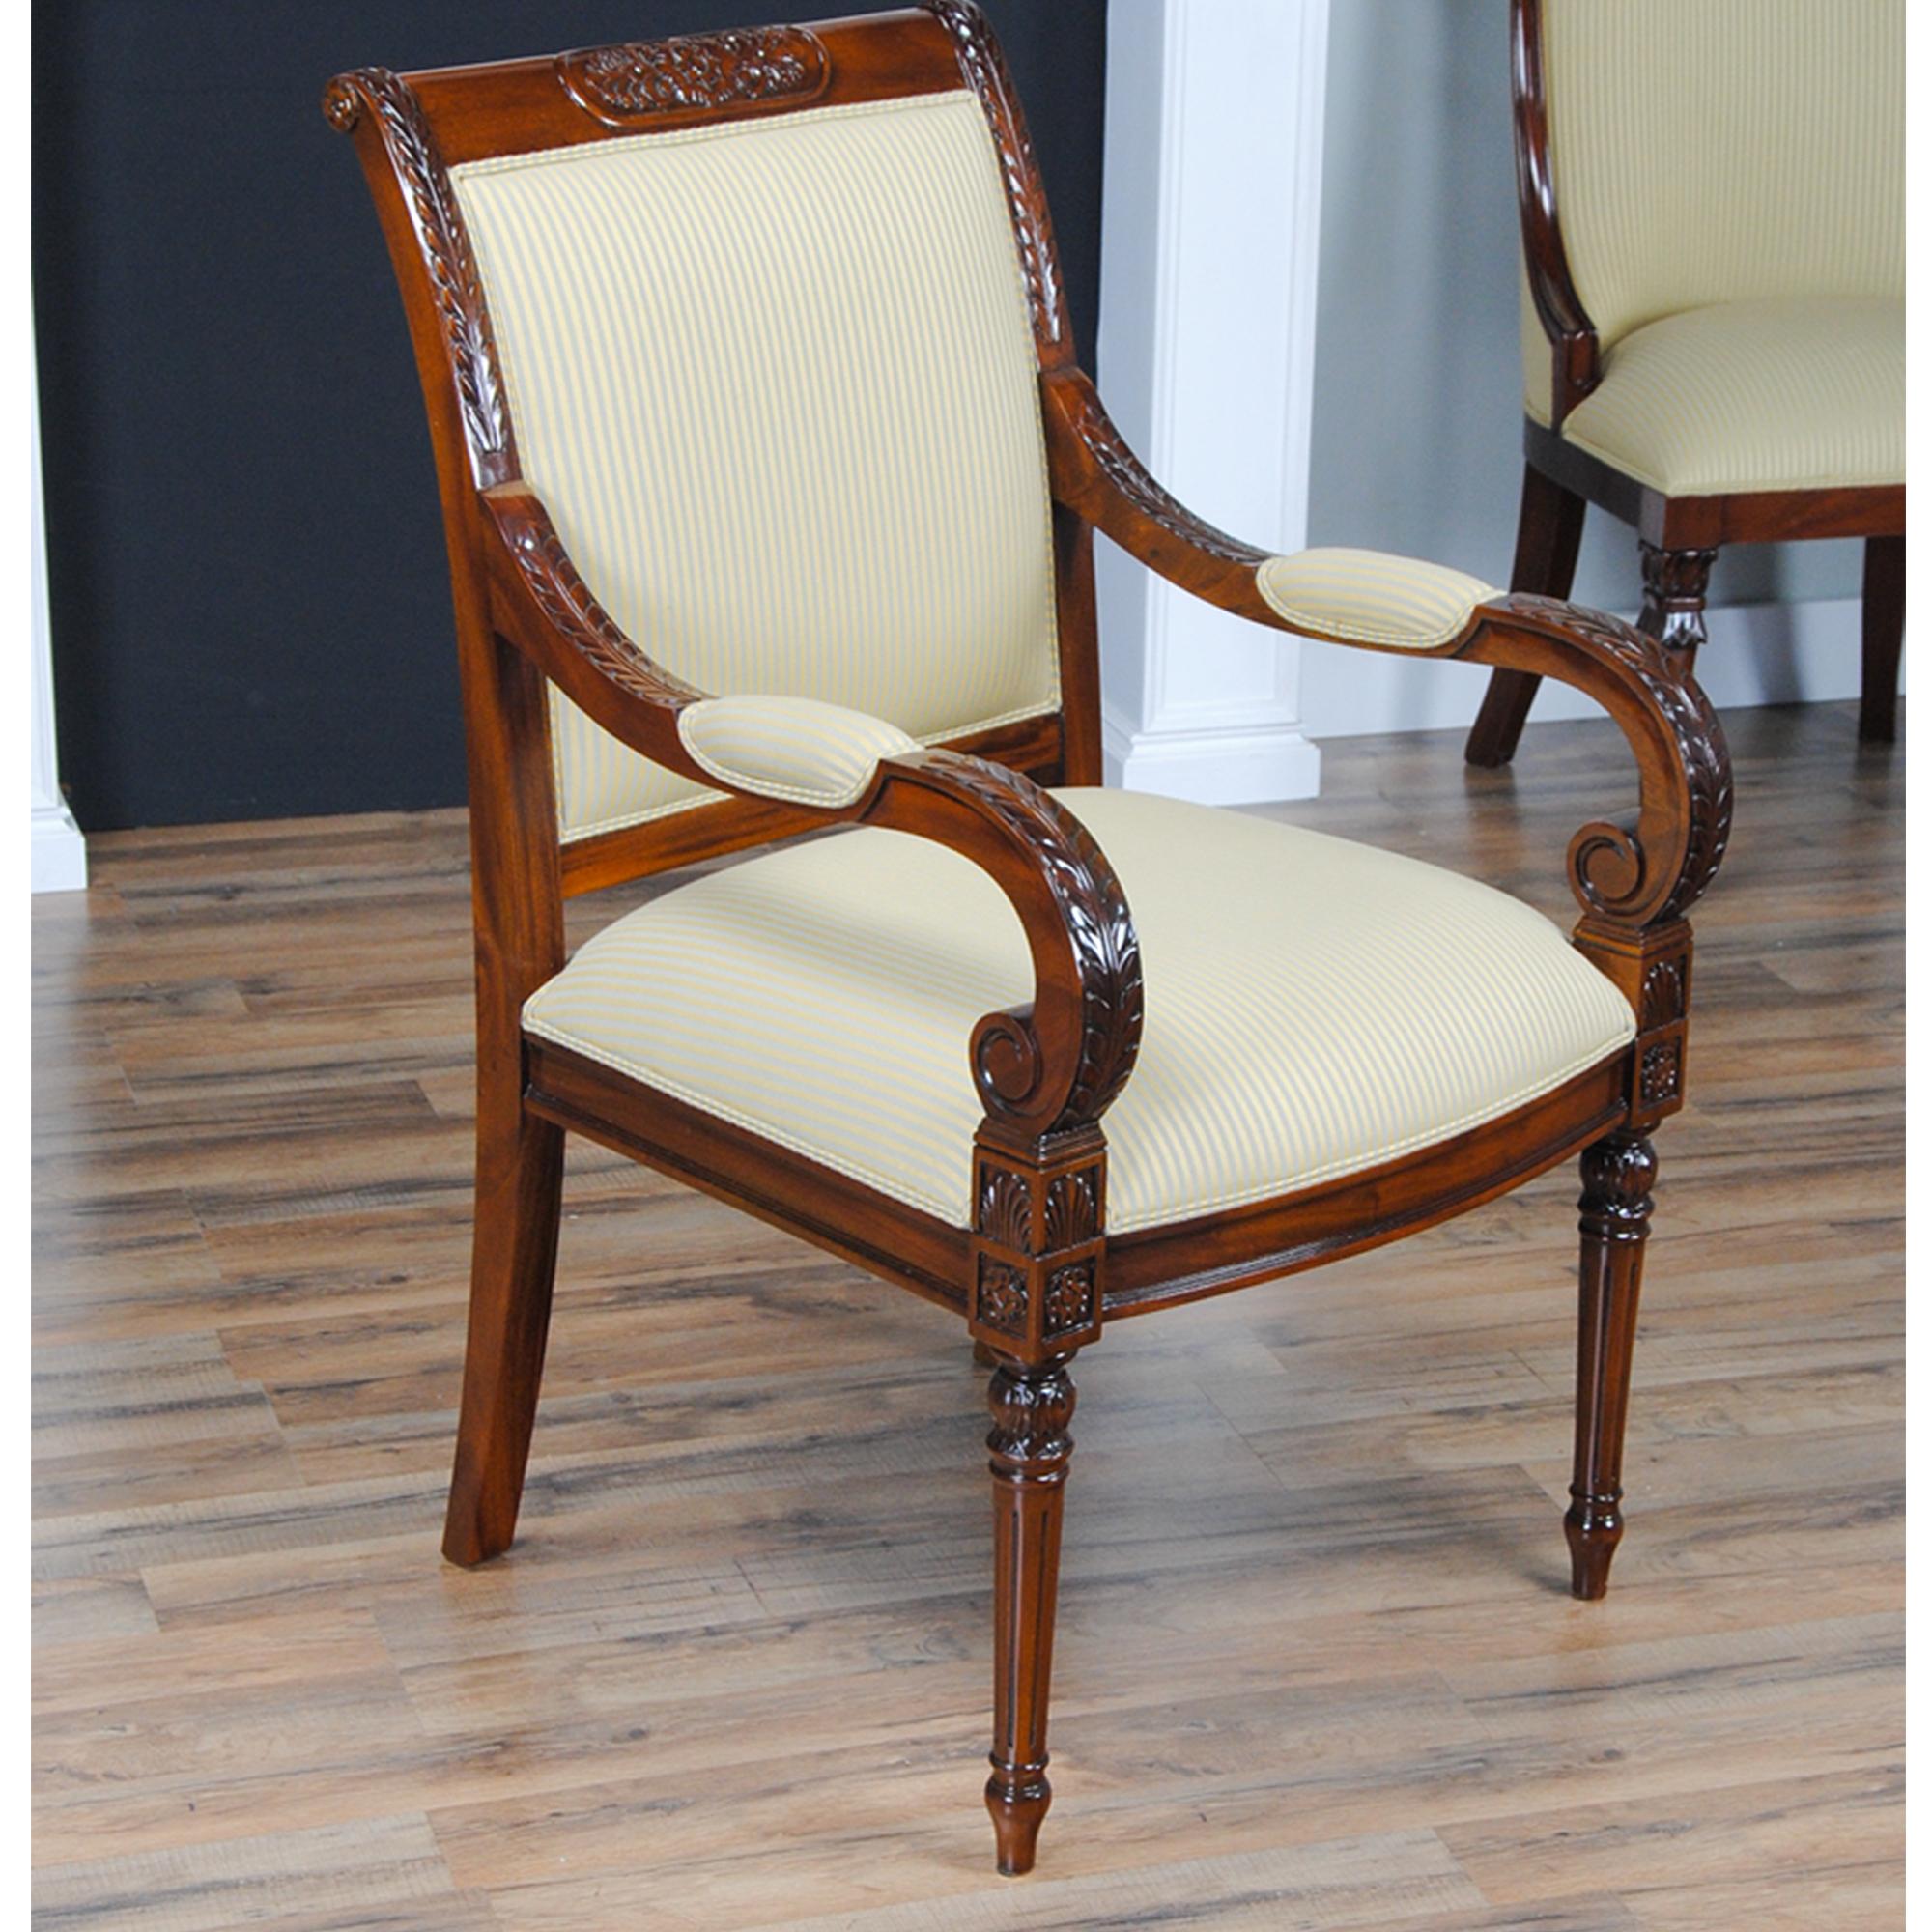 The set of 10 Carved Empire Upholstered Chairs comprise of a group with 2 arm chairs and 8 side chairs. All chairs with a carved top rail and featuring a fully upholstered back which gives this chair a great quality designer look as well as a